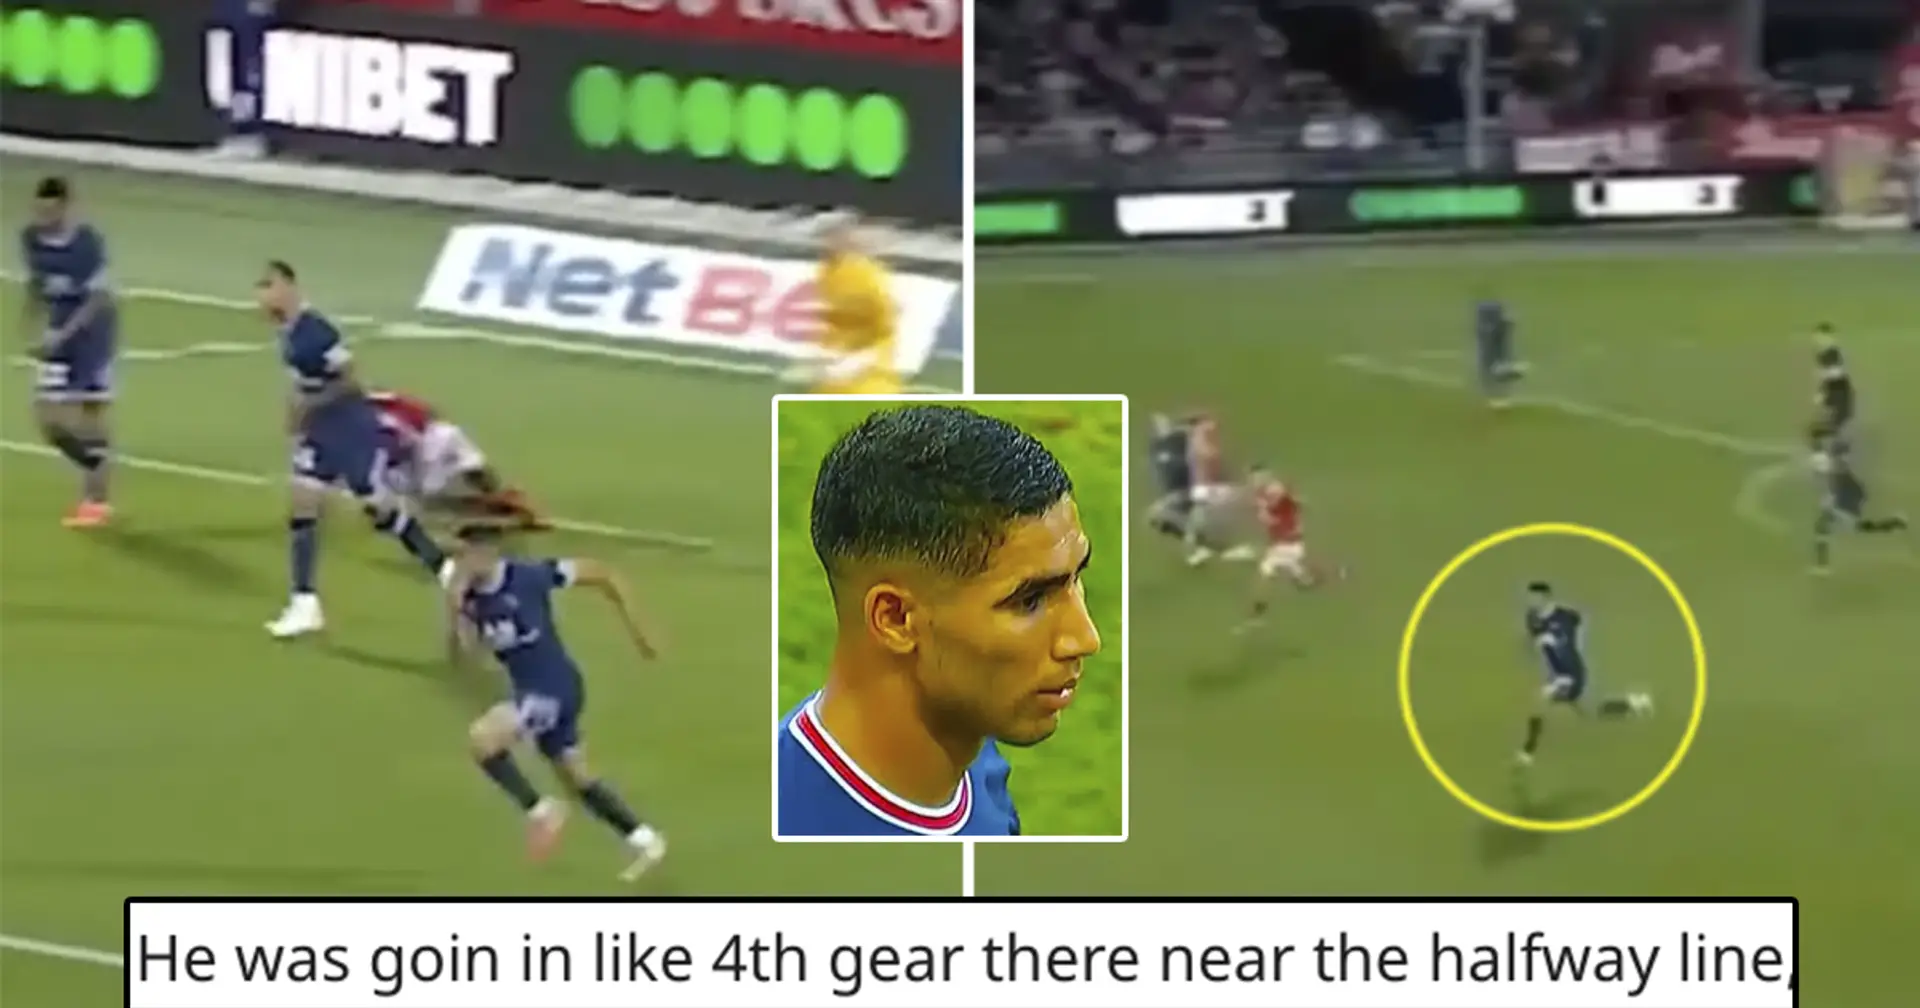 'How could Real Madrid sell him?': Hakimi's incredible run vs Brest goes viral